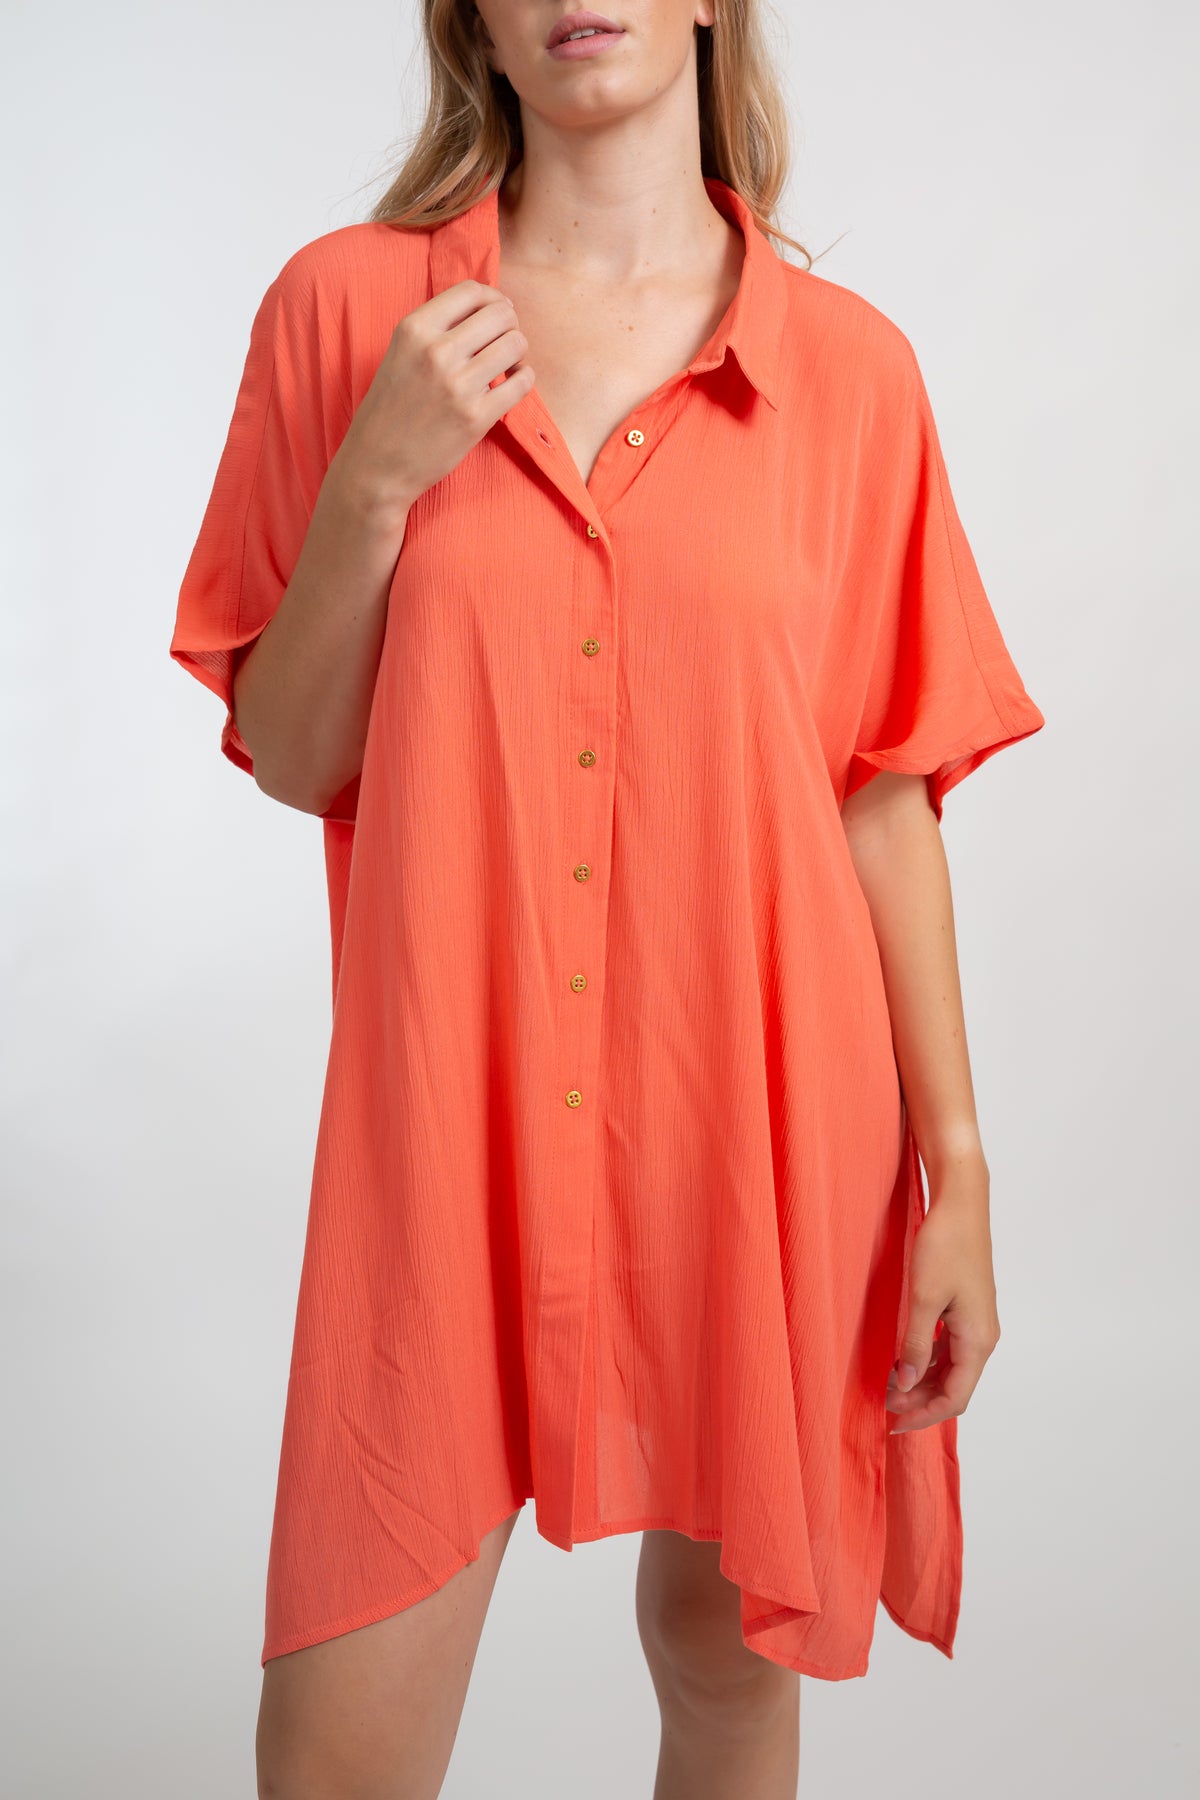 A blonde Caucasian model wearing a orange coral colored in "punch" big shirt bathing suit cover up shirt dress, standing in a studio.